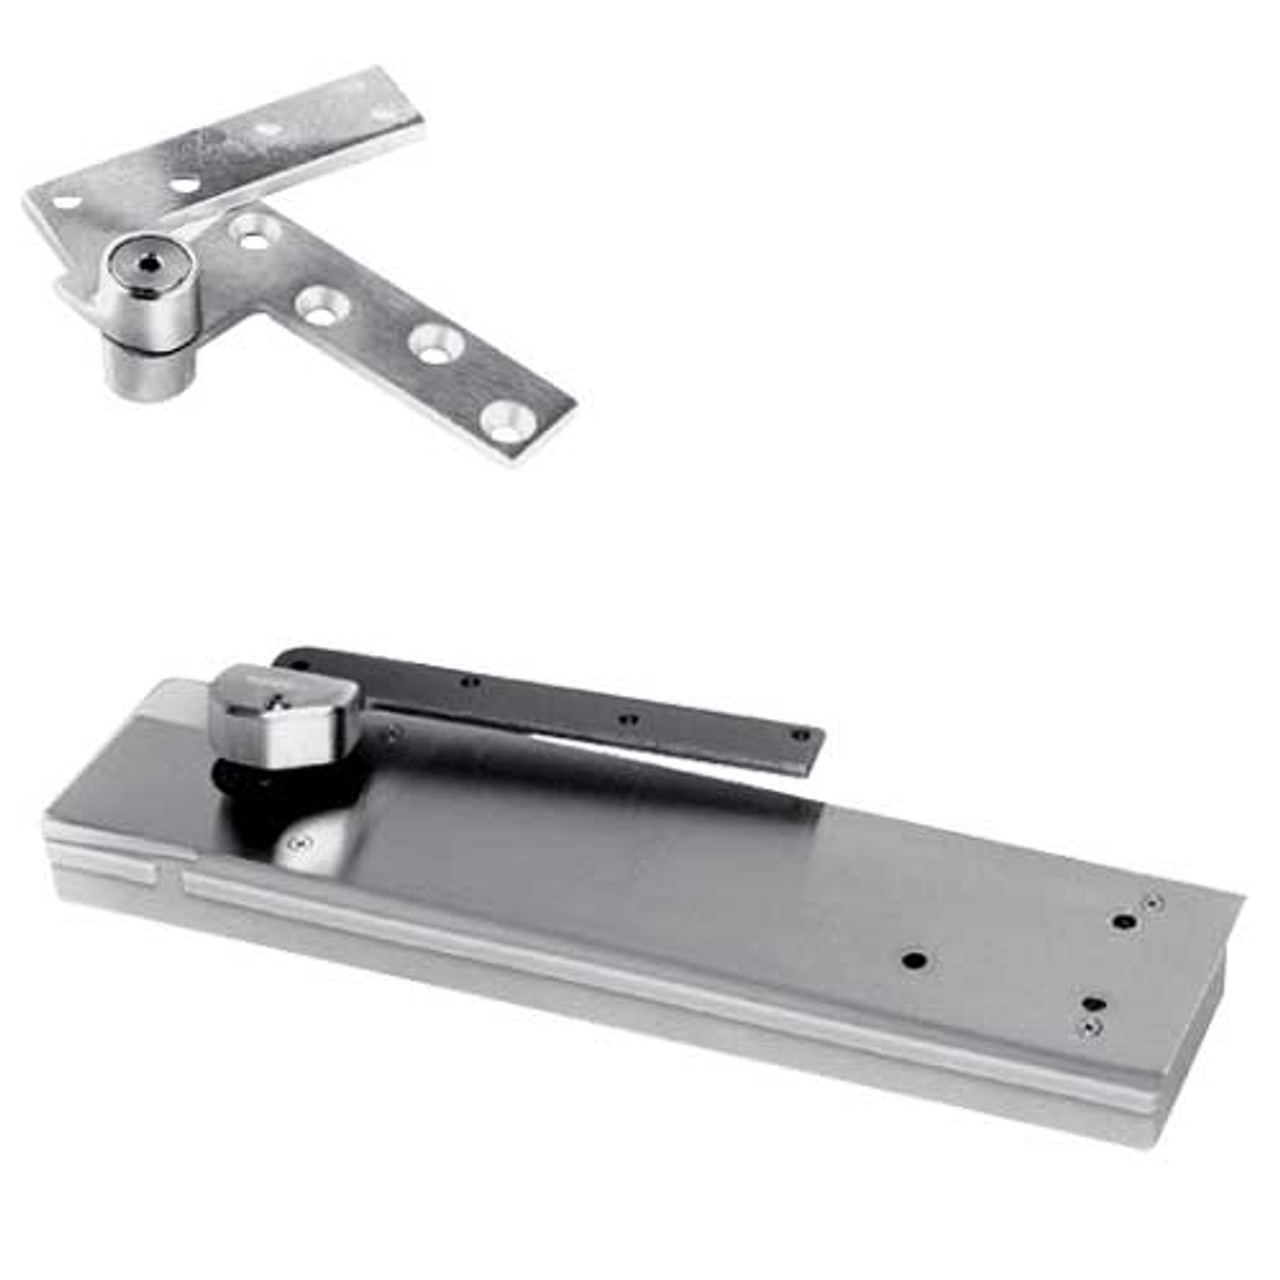 5103ABC180-1-1/2OS-LCC-LH-626 Rixson 51 Series 1-1/2" Offset Hung Shallow Depth Floor Closers in Satin Chrome Finish